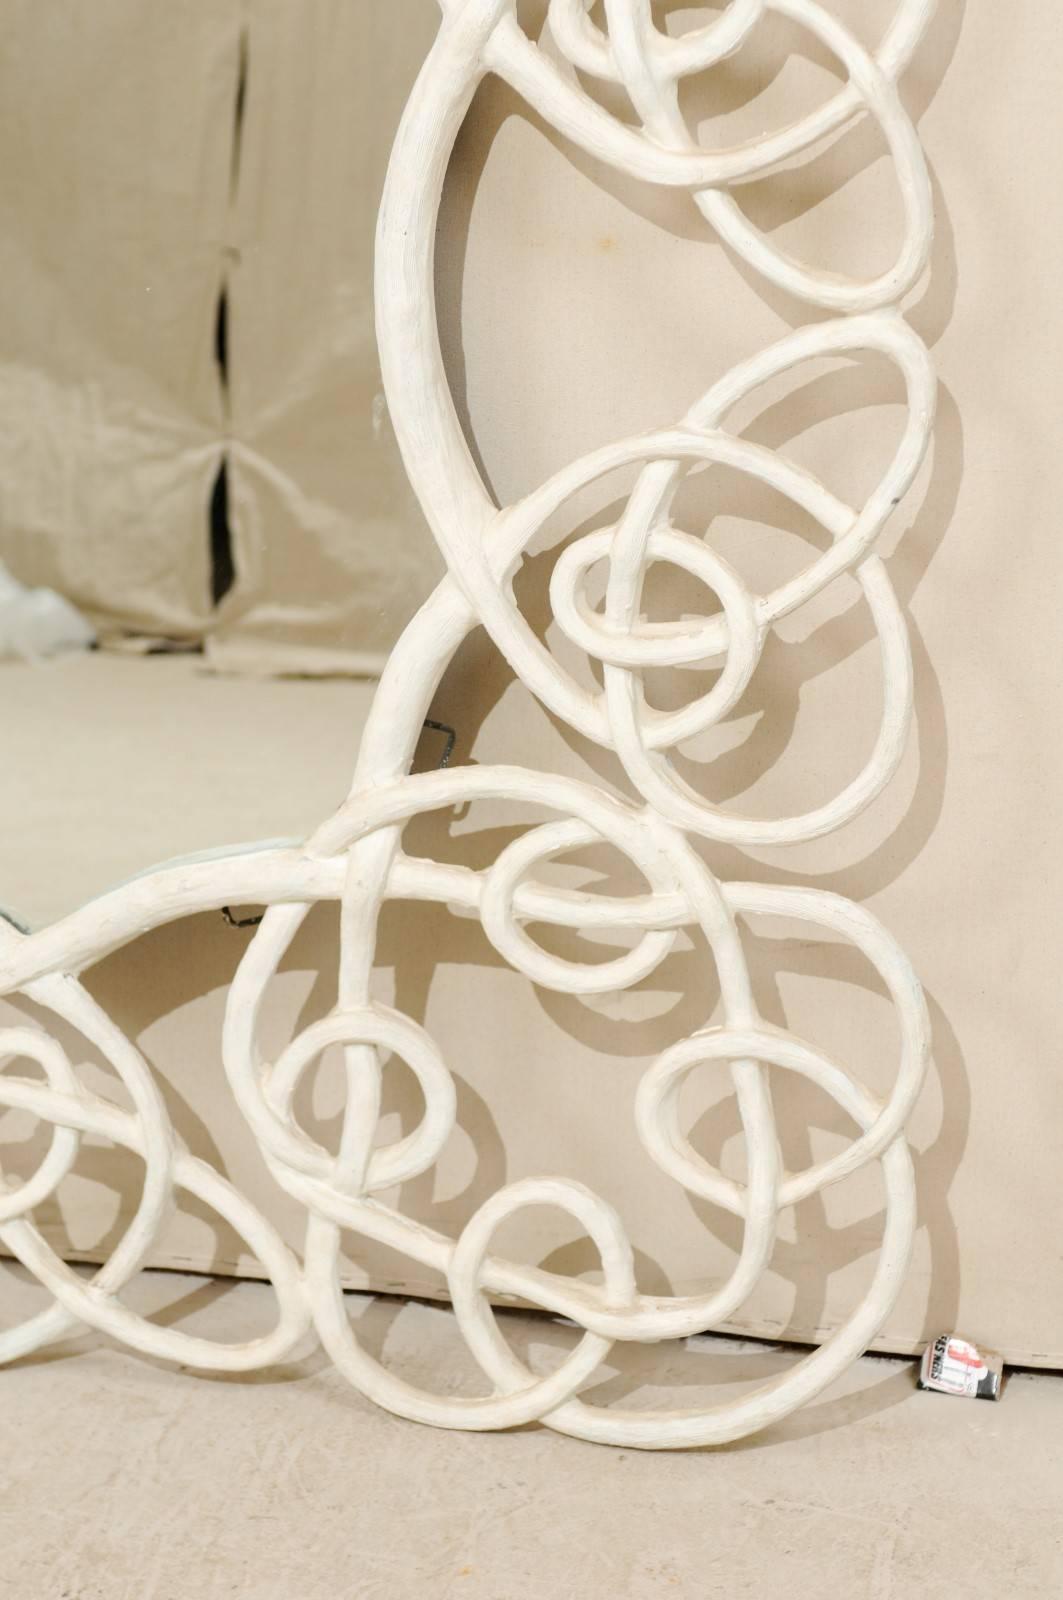 Composition Large Wall Mirror with Intricate Twisting Vine like Pattern in the Surround